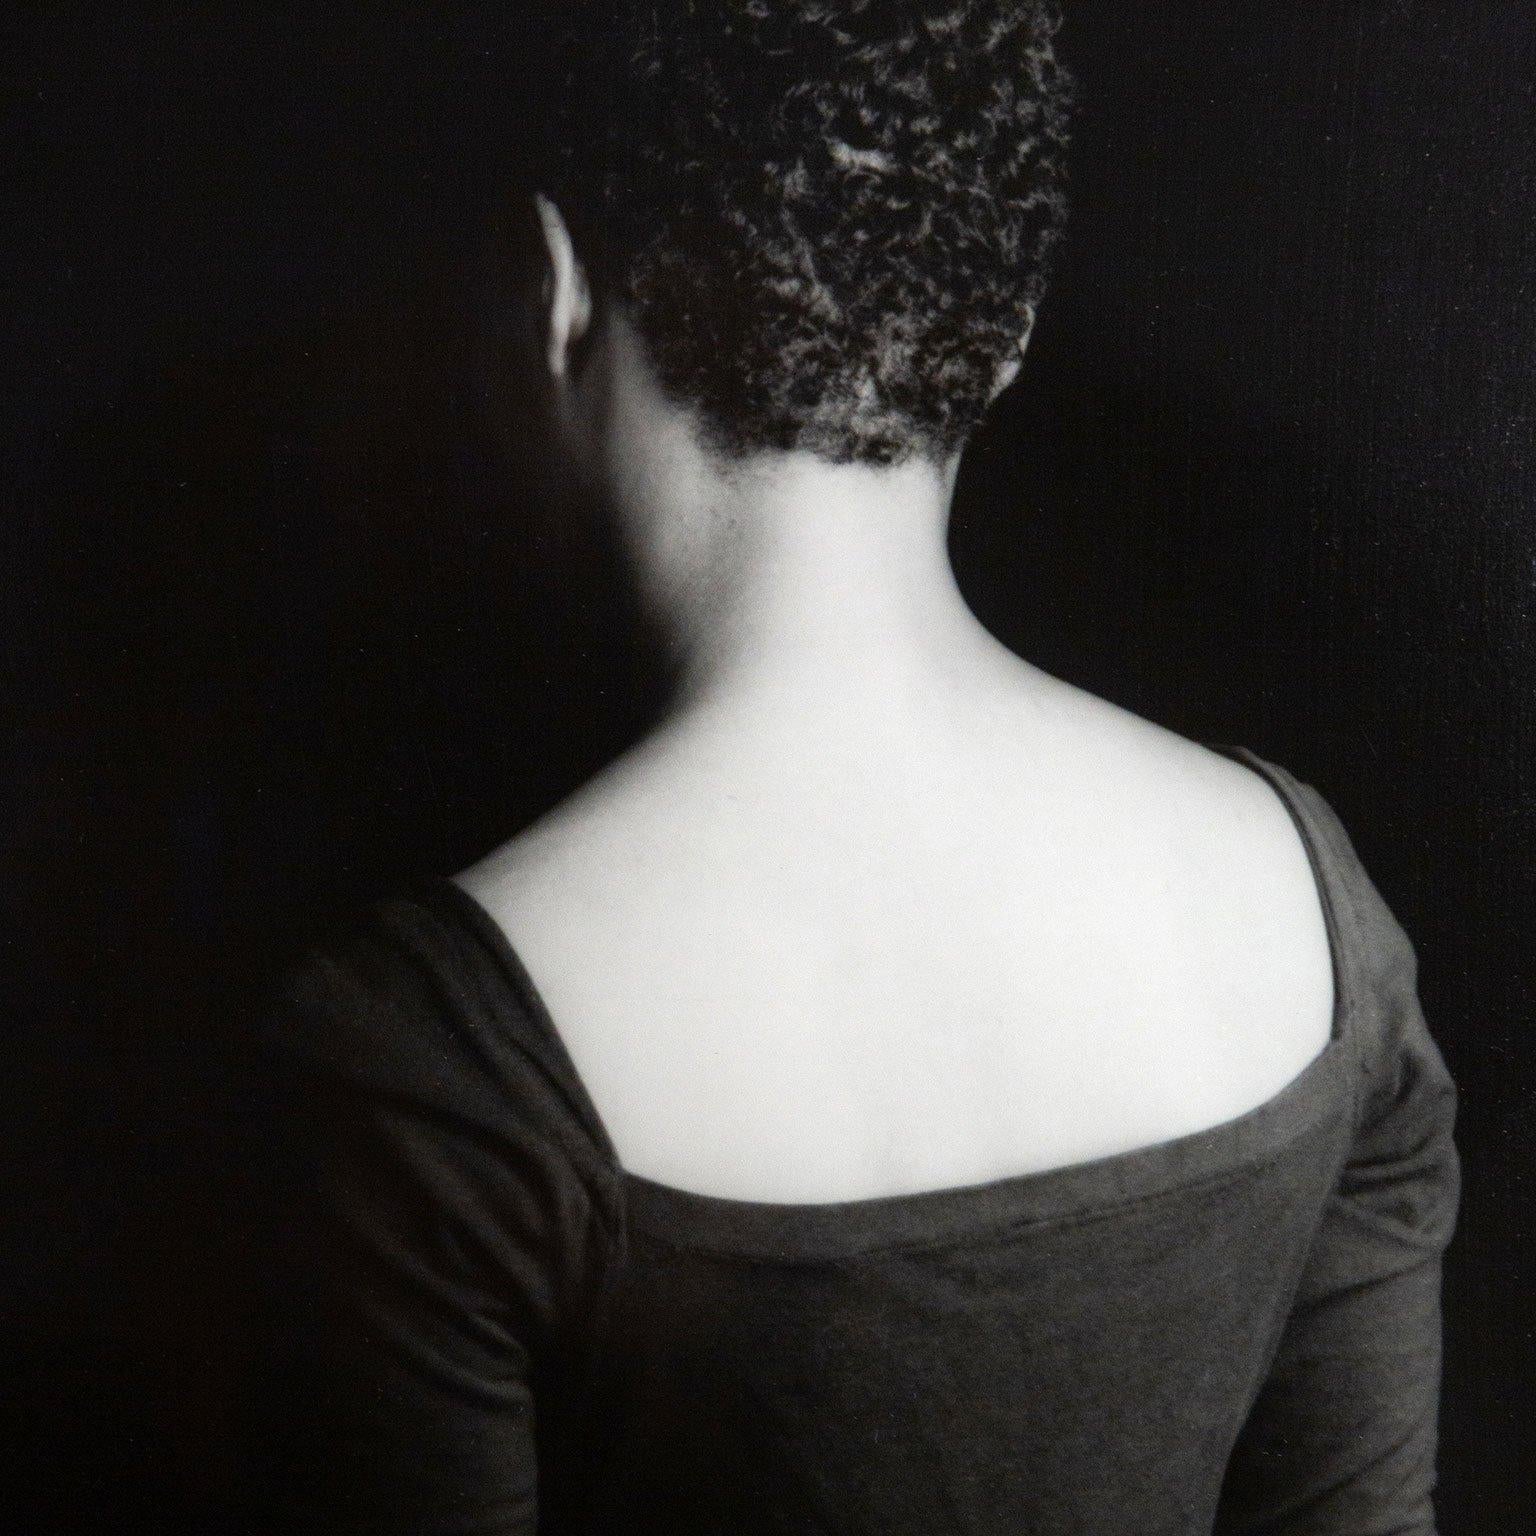 Lorna Simpson is an American artist renowned as a pioneer of conceptual photography. Her artwork, regardless of medium, explores the interplay between historical memory, culture, and identity. 

Influential in post-colonial and feminist circles,